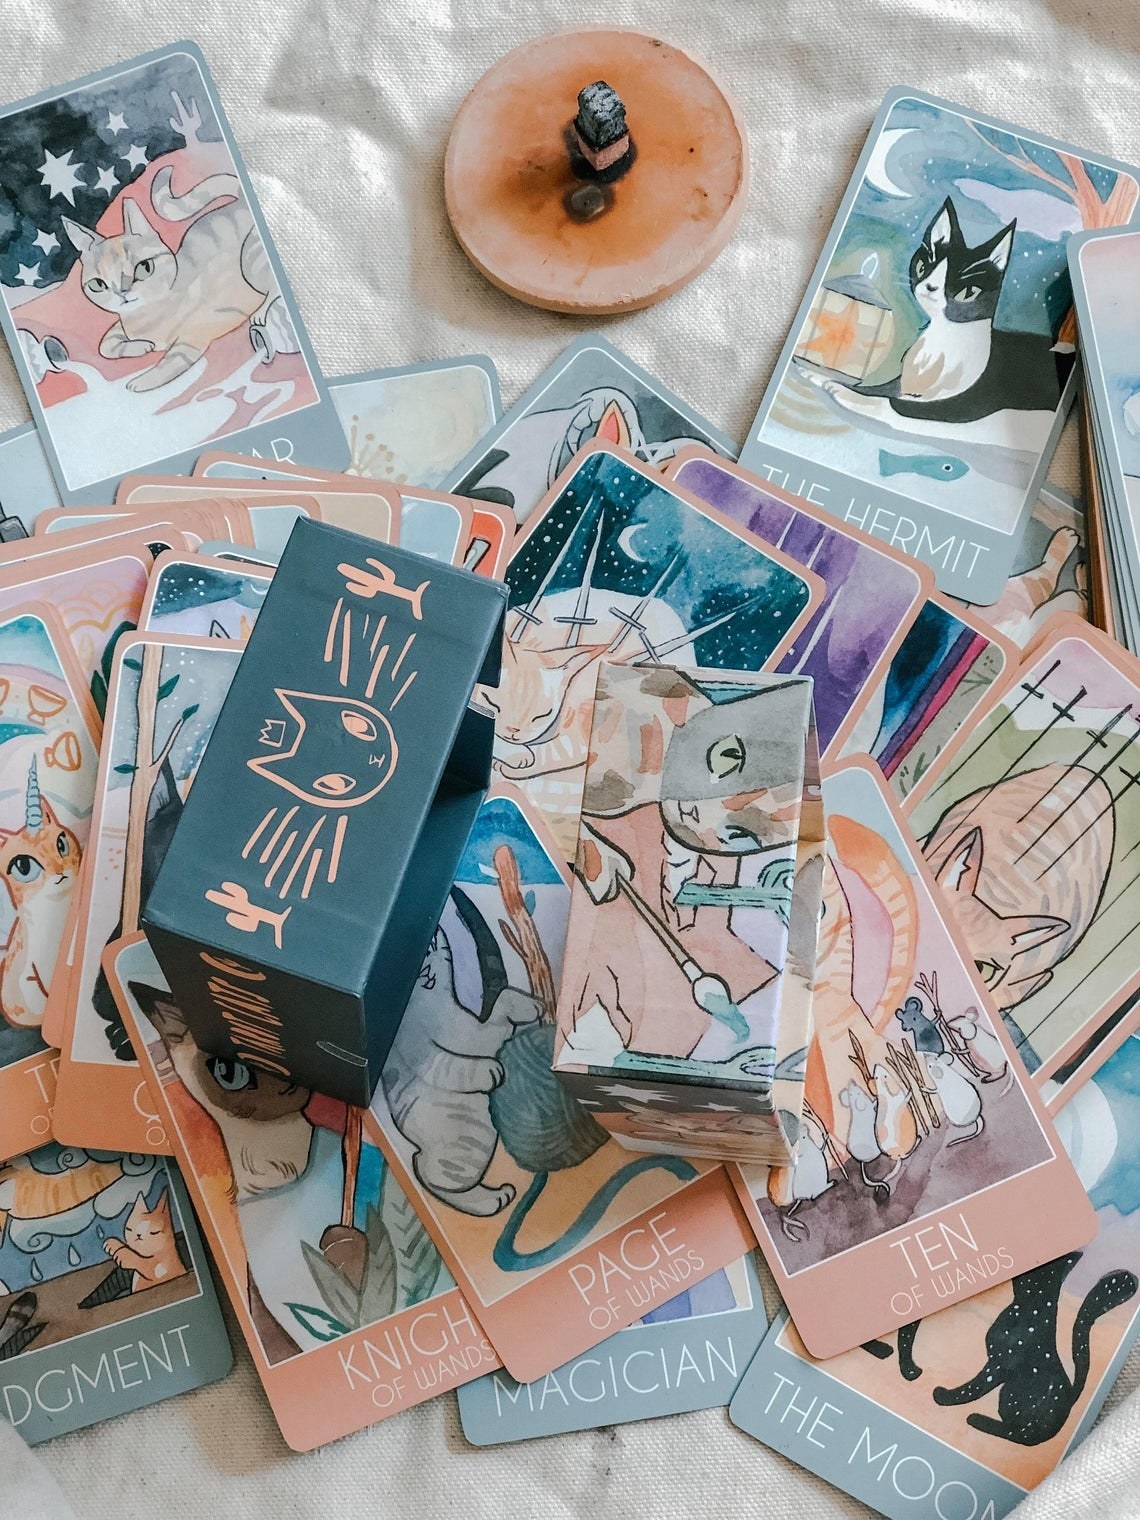 tarot cards with cat illustrations